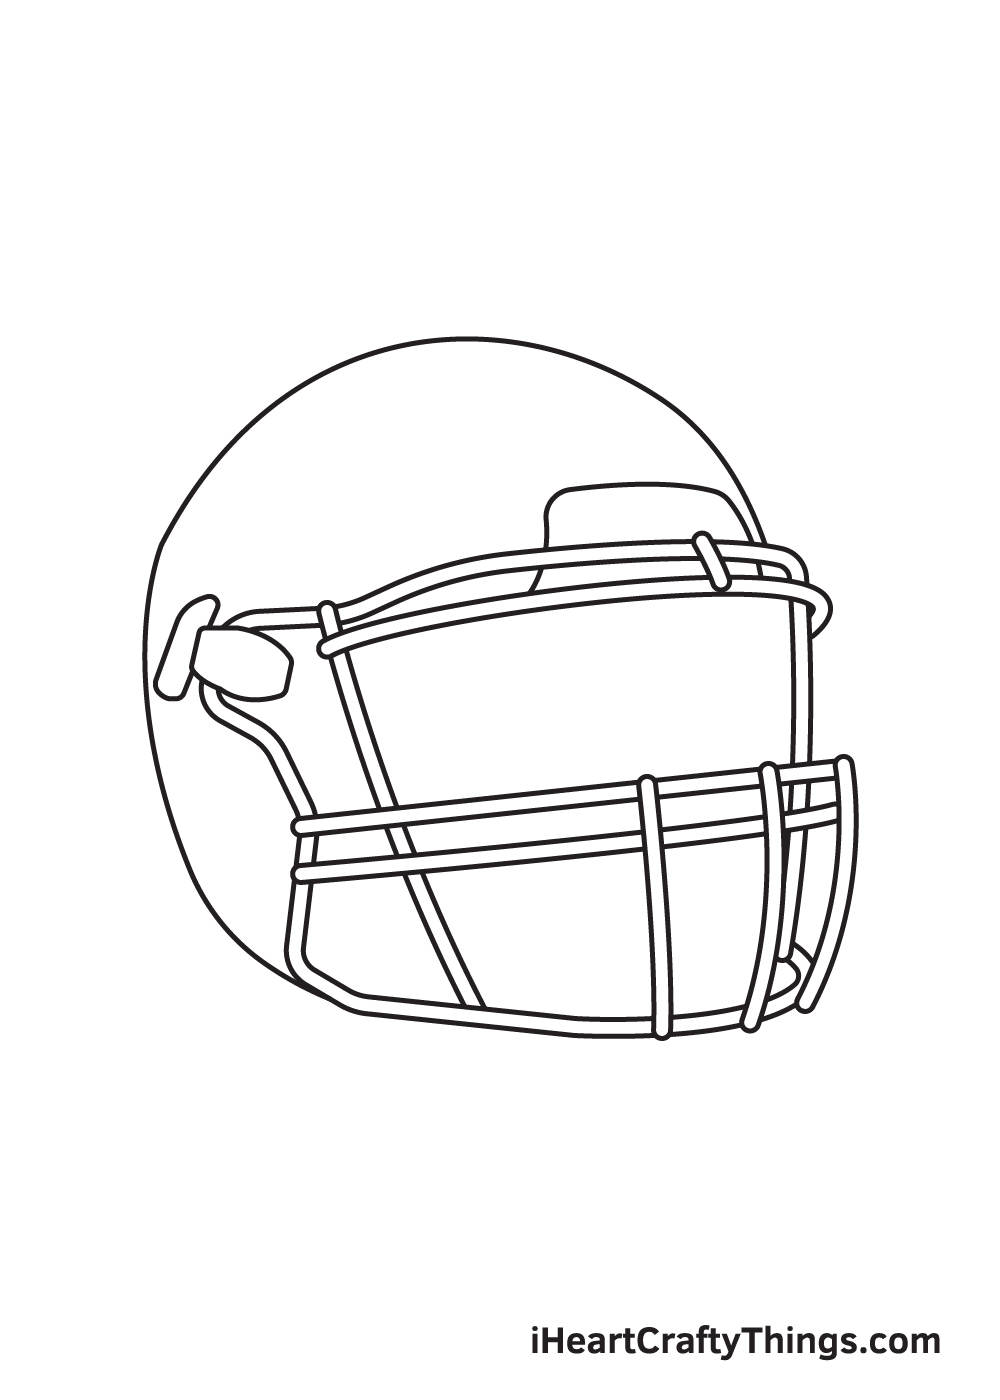 How to draw scenery of playing football.Step by step(easy draw) - YouTube